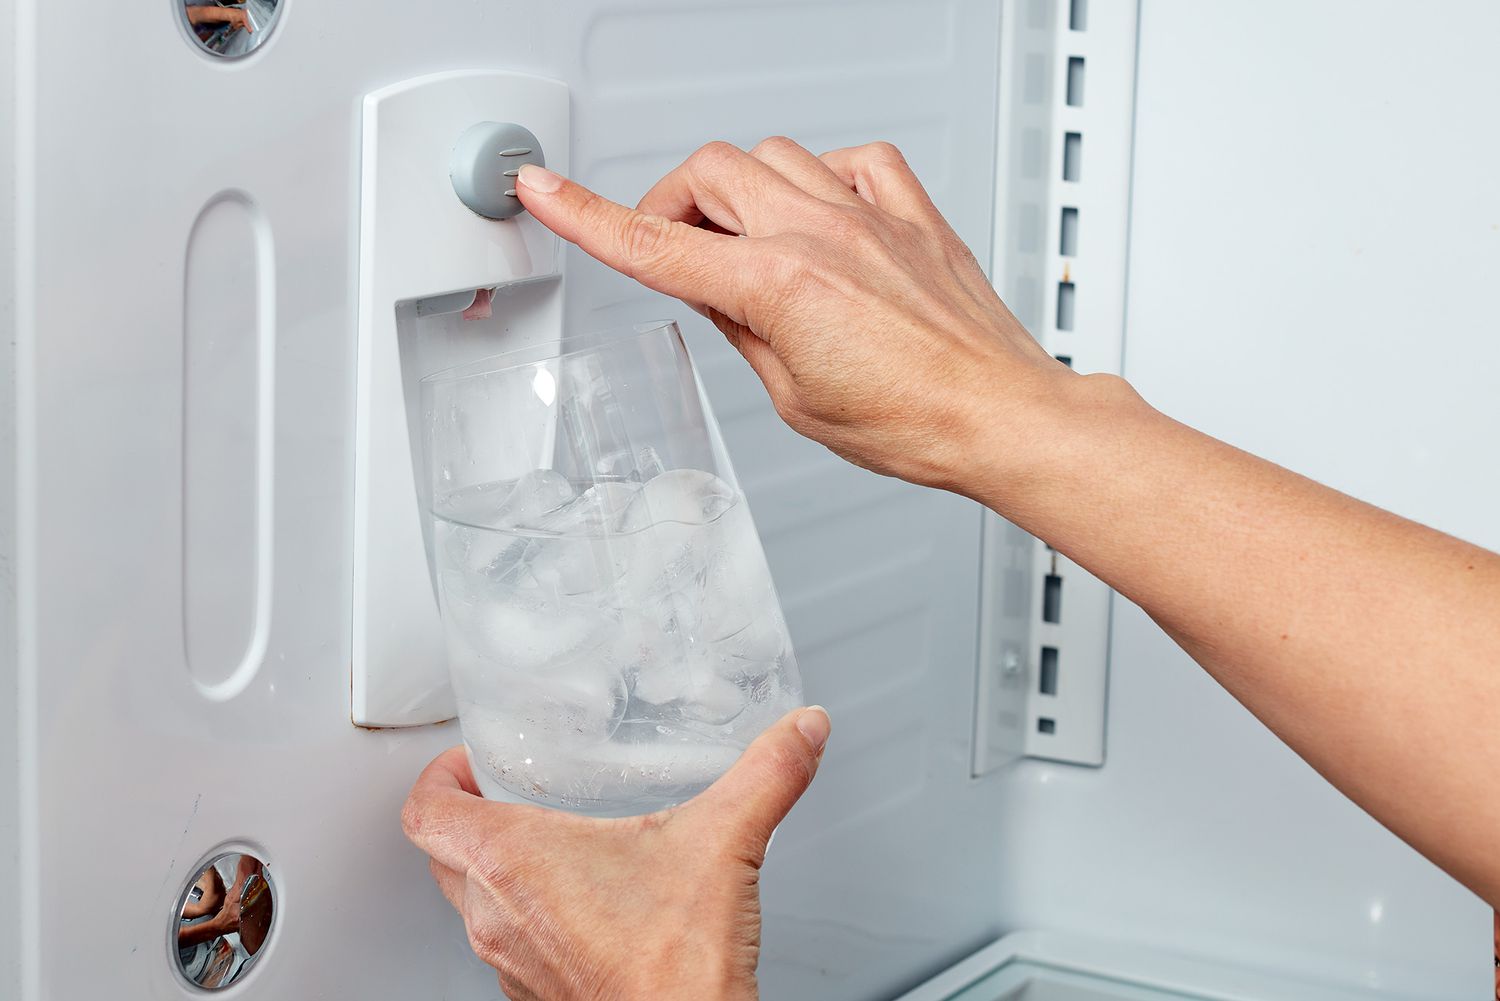 Water being versed from refrigerator into glass cup with ice